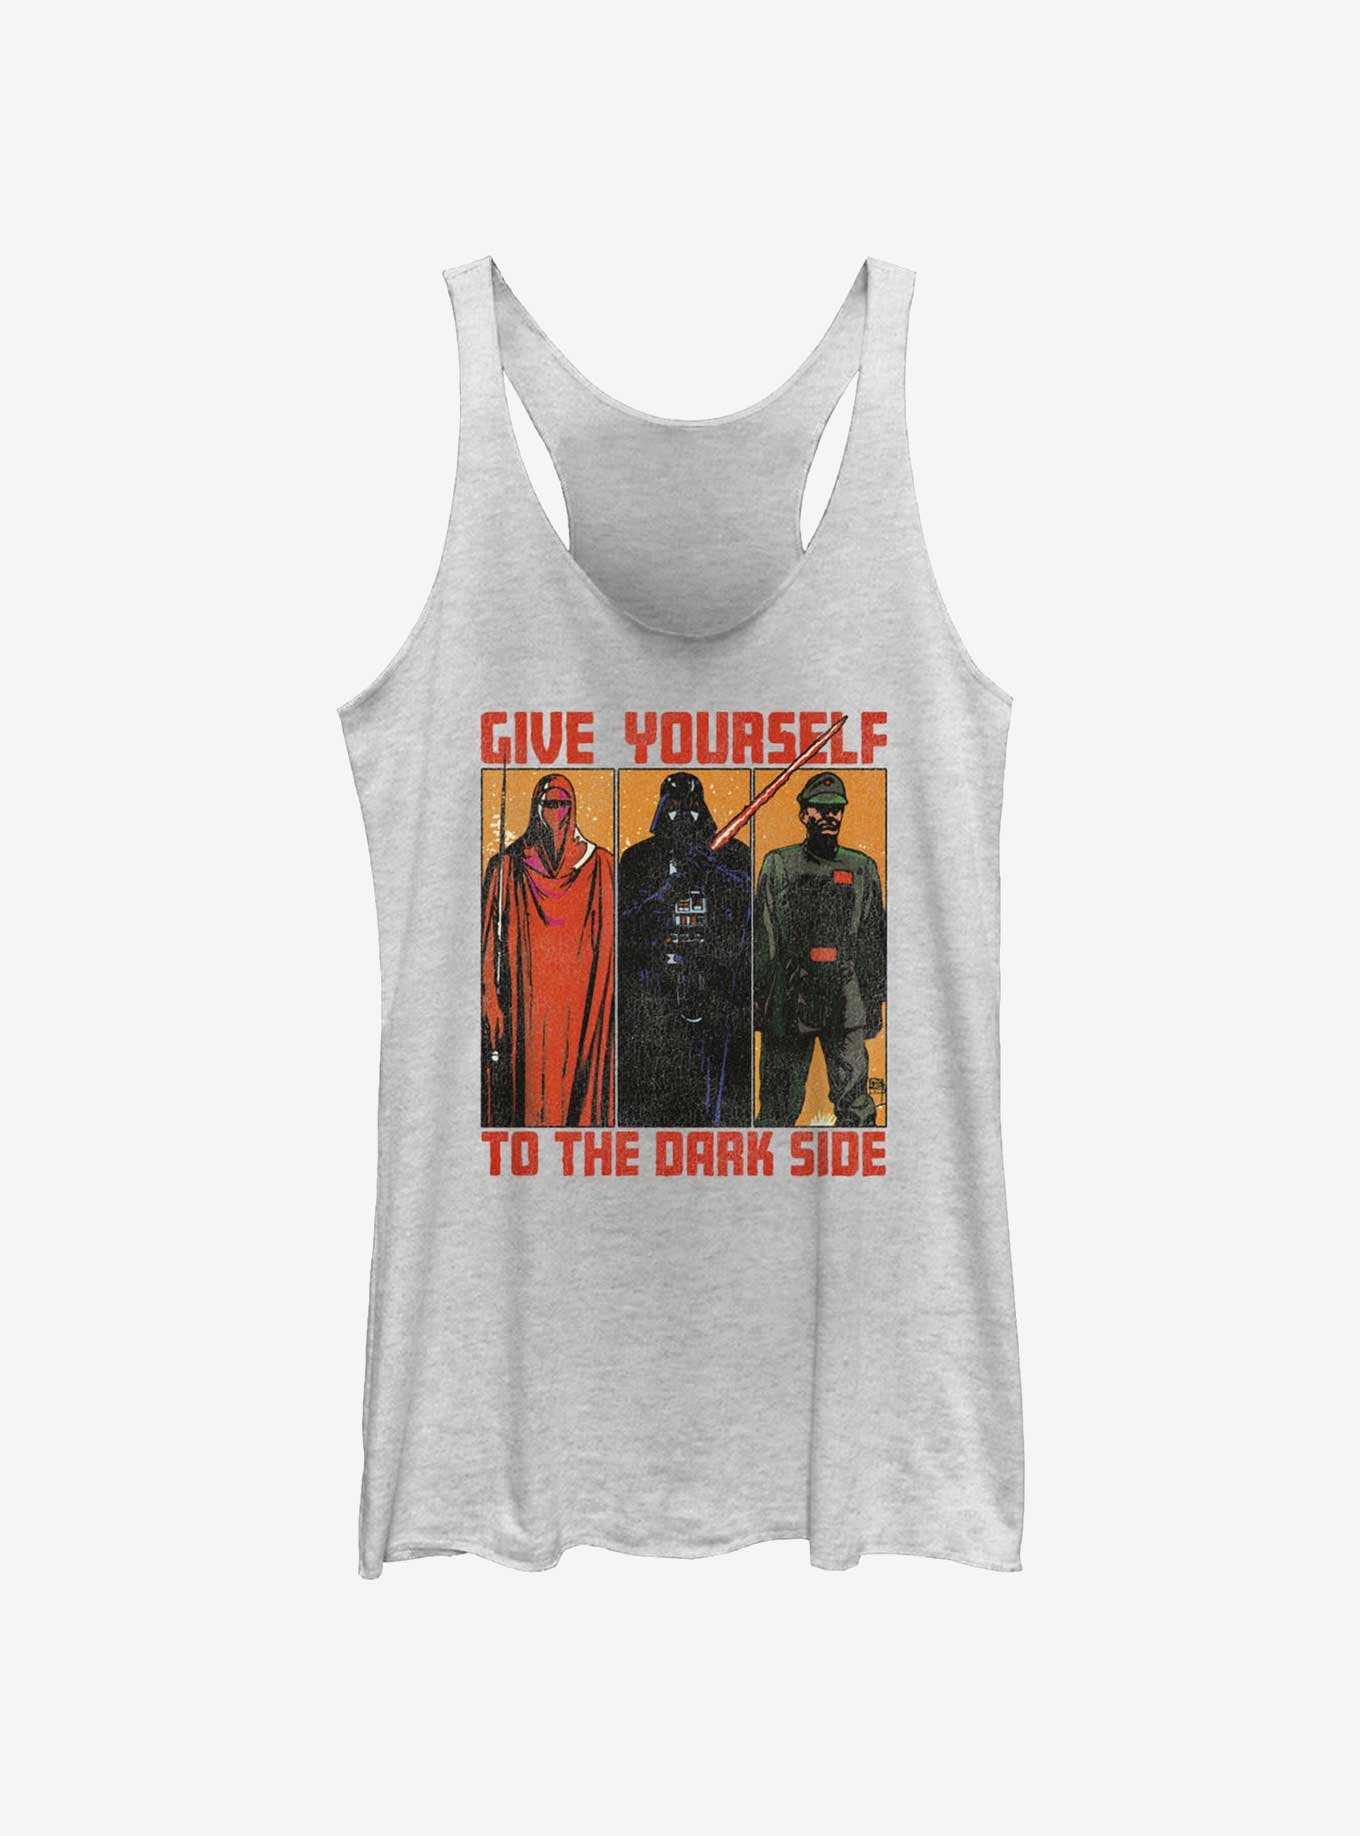 Star Wars Return of the Jedi 40th Anniversary Give Yourself To The Dark Side Girls Tank, , hi-res